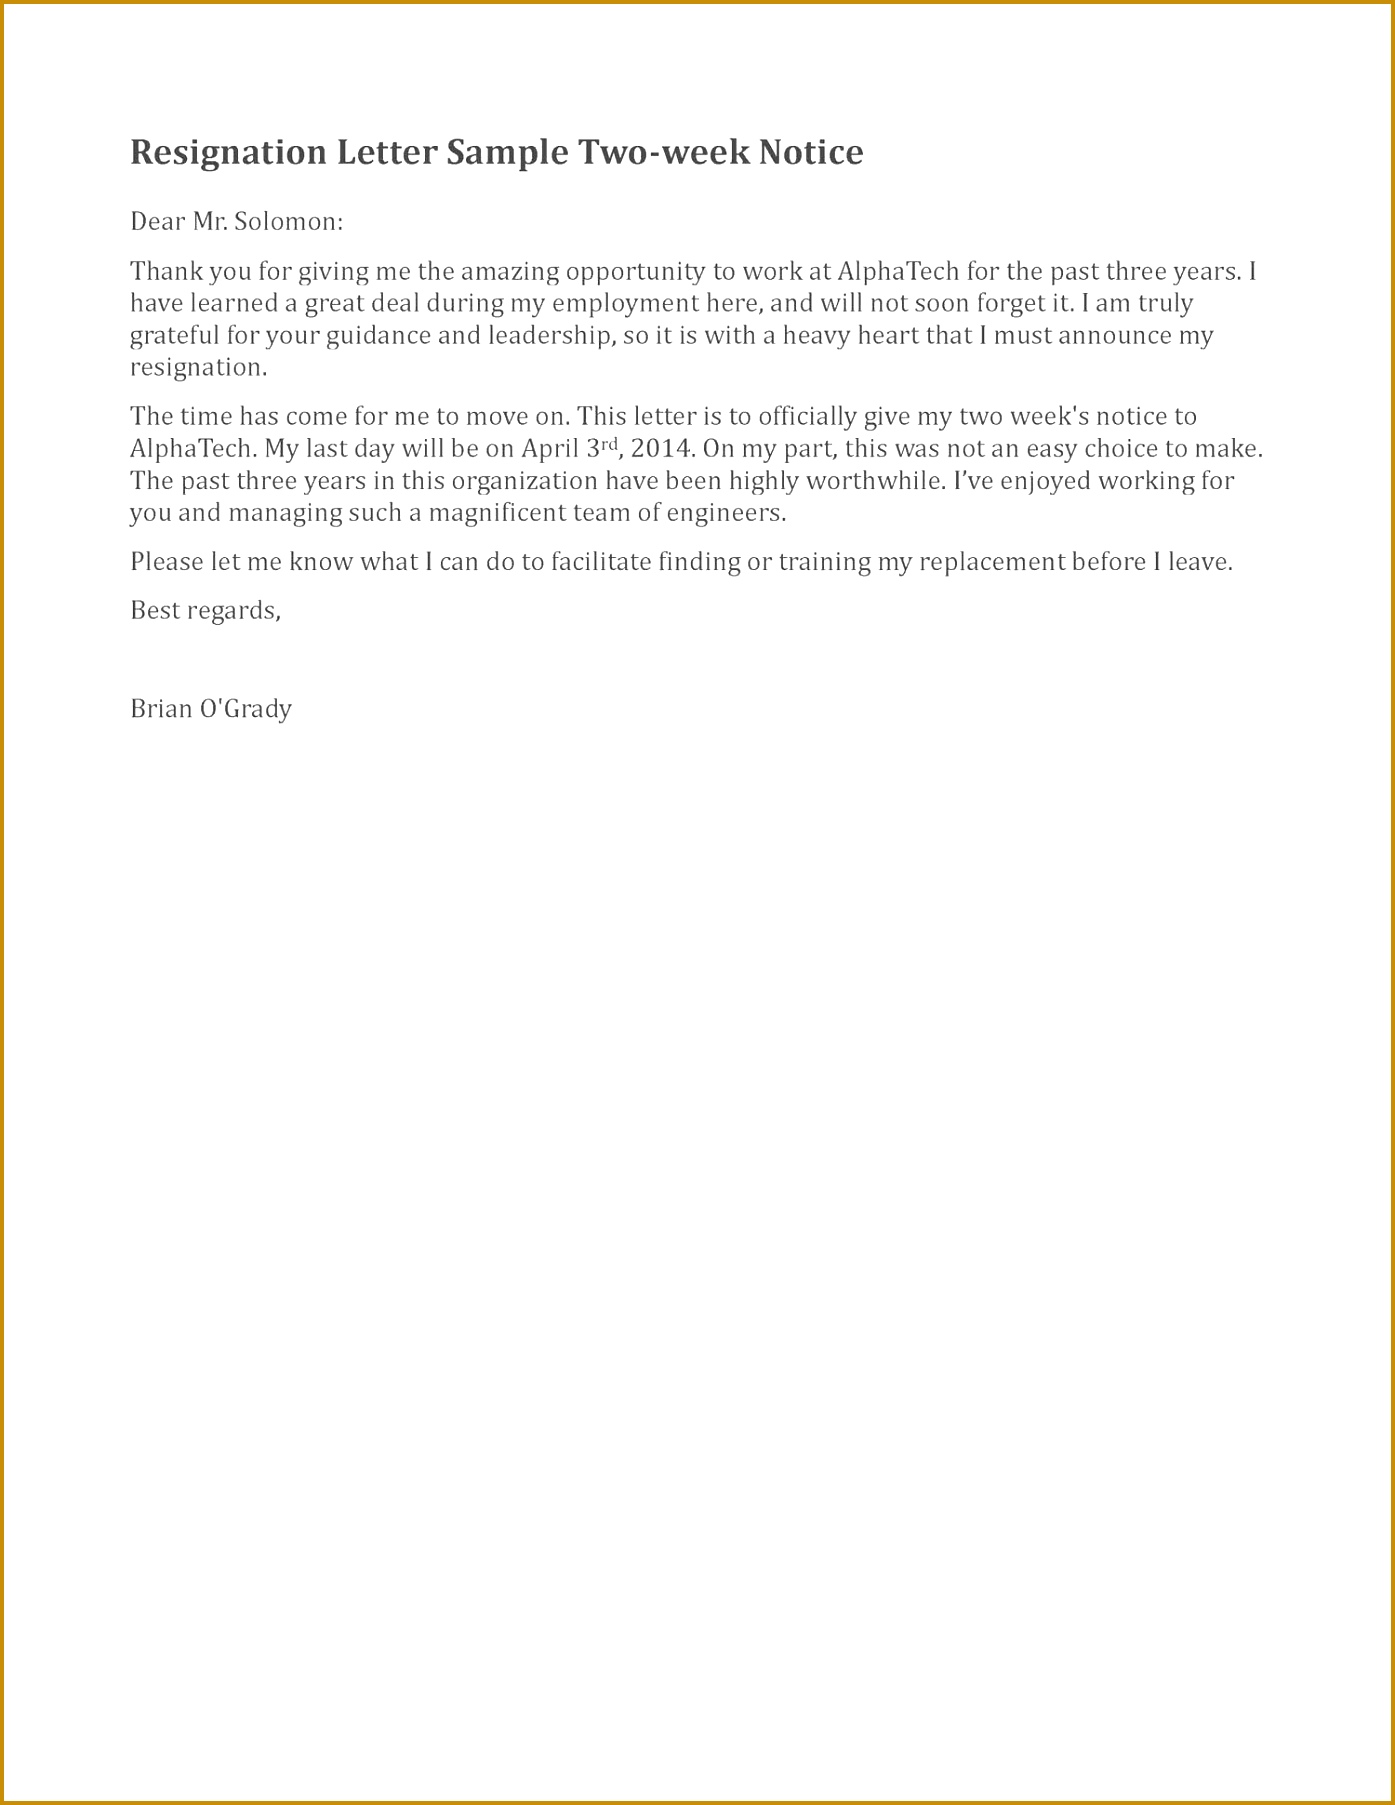 Related Samples of Resignation Letter 2 Week Notice 13951805